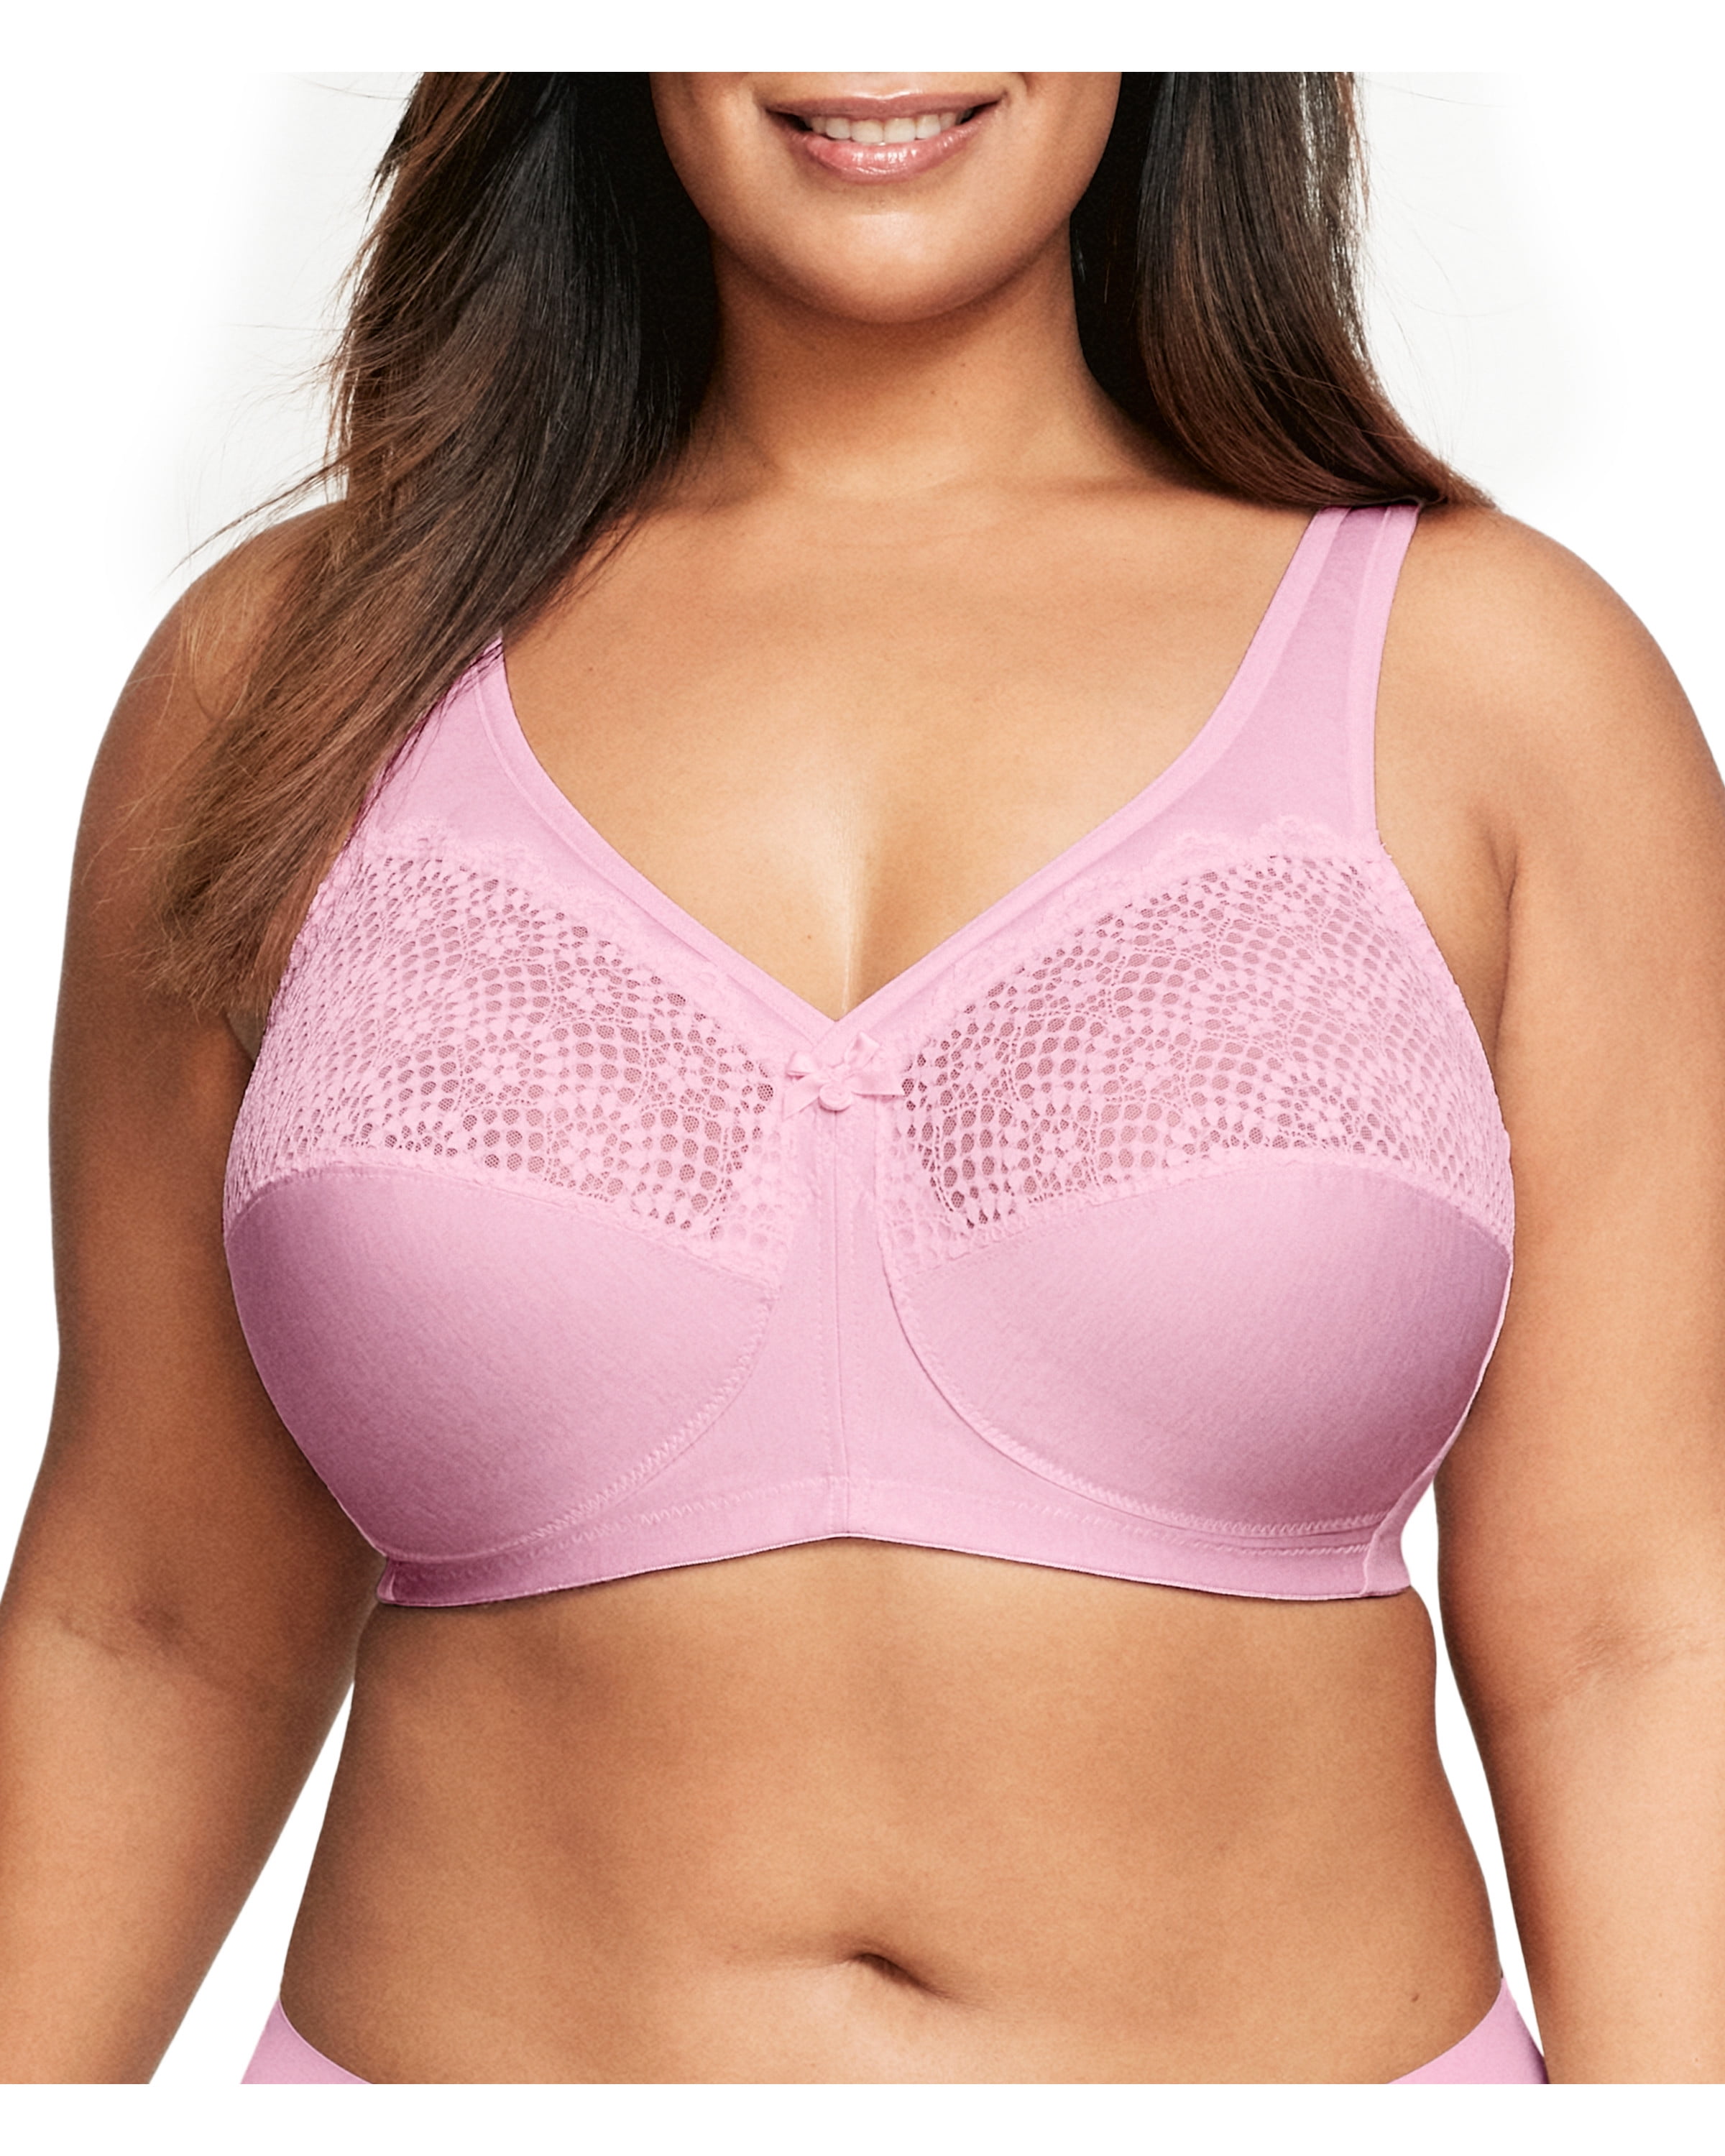 Women's Cotton Full Coverage Wirefree Non-padded Lace Plus Size Bra 46B